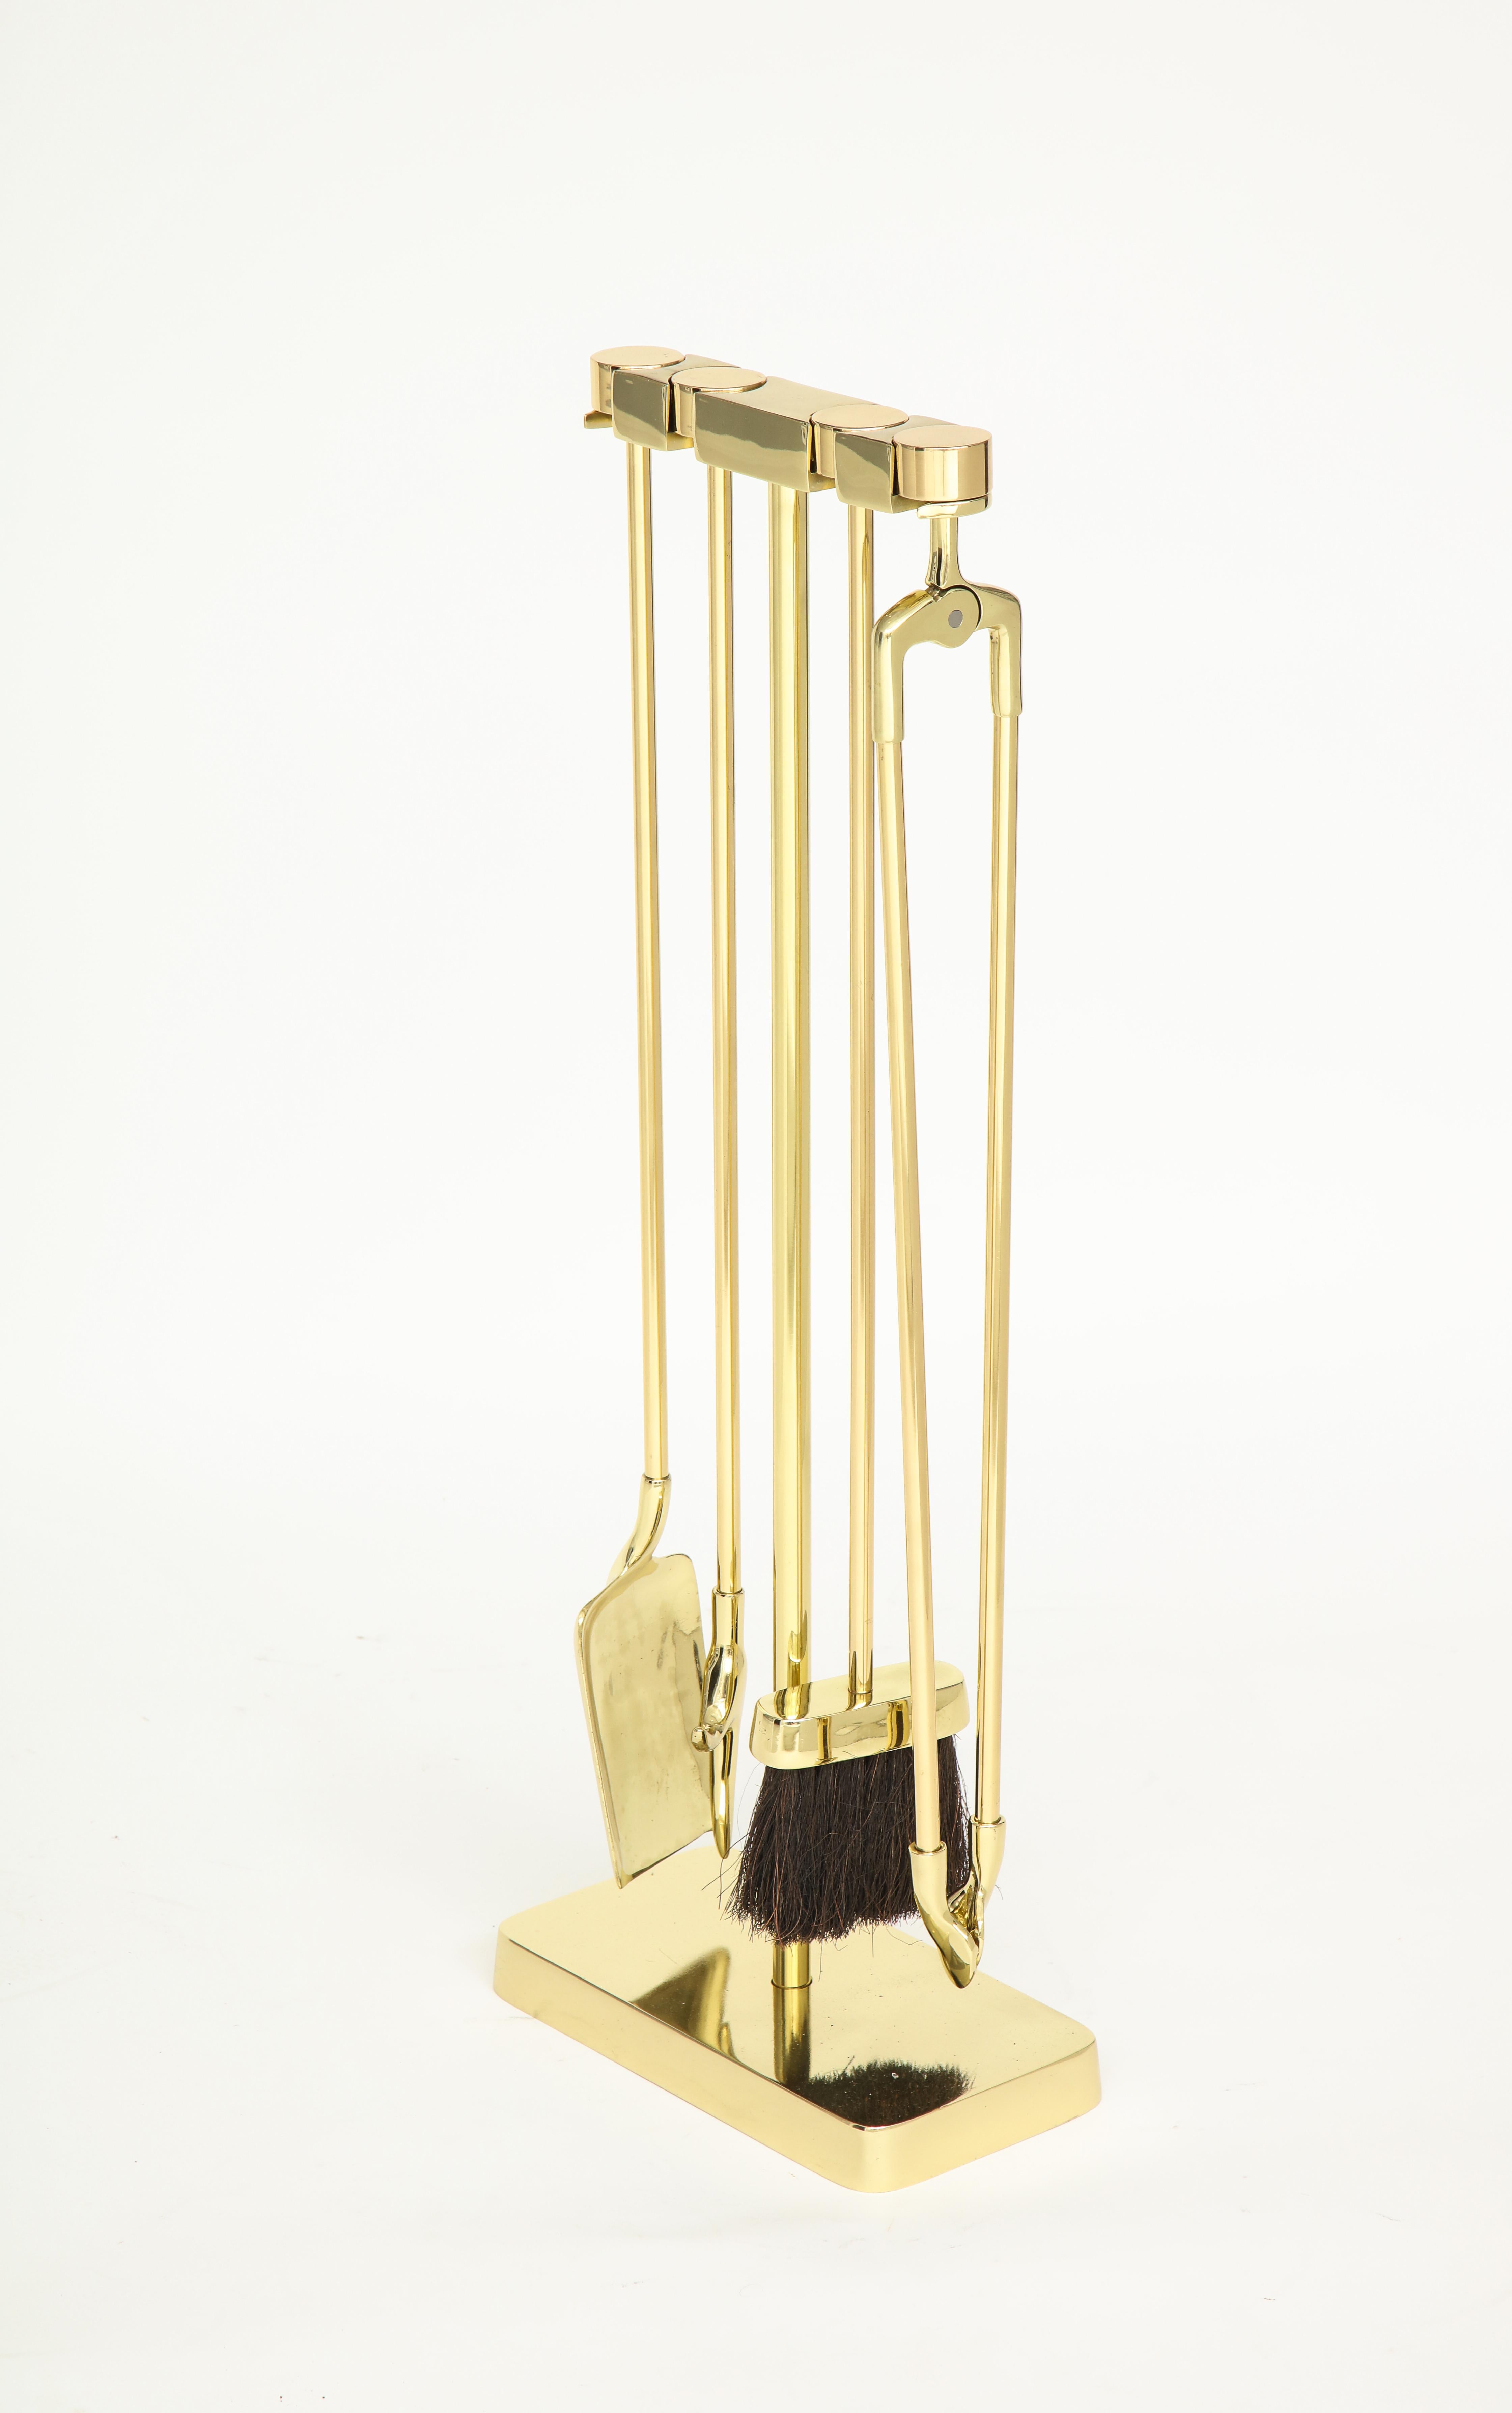 Set of heavy brass modernist firetools suspended on a heavy brass stand. The Minimalist designed handles cleverly slide into the stand.